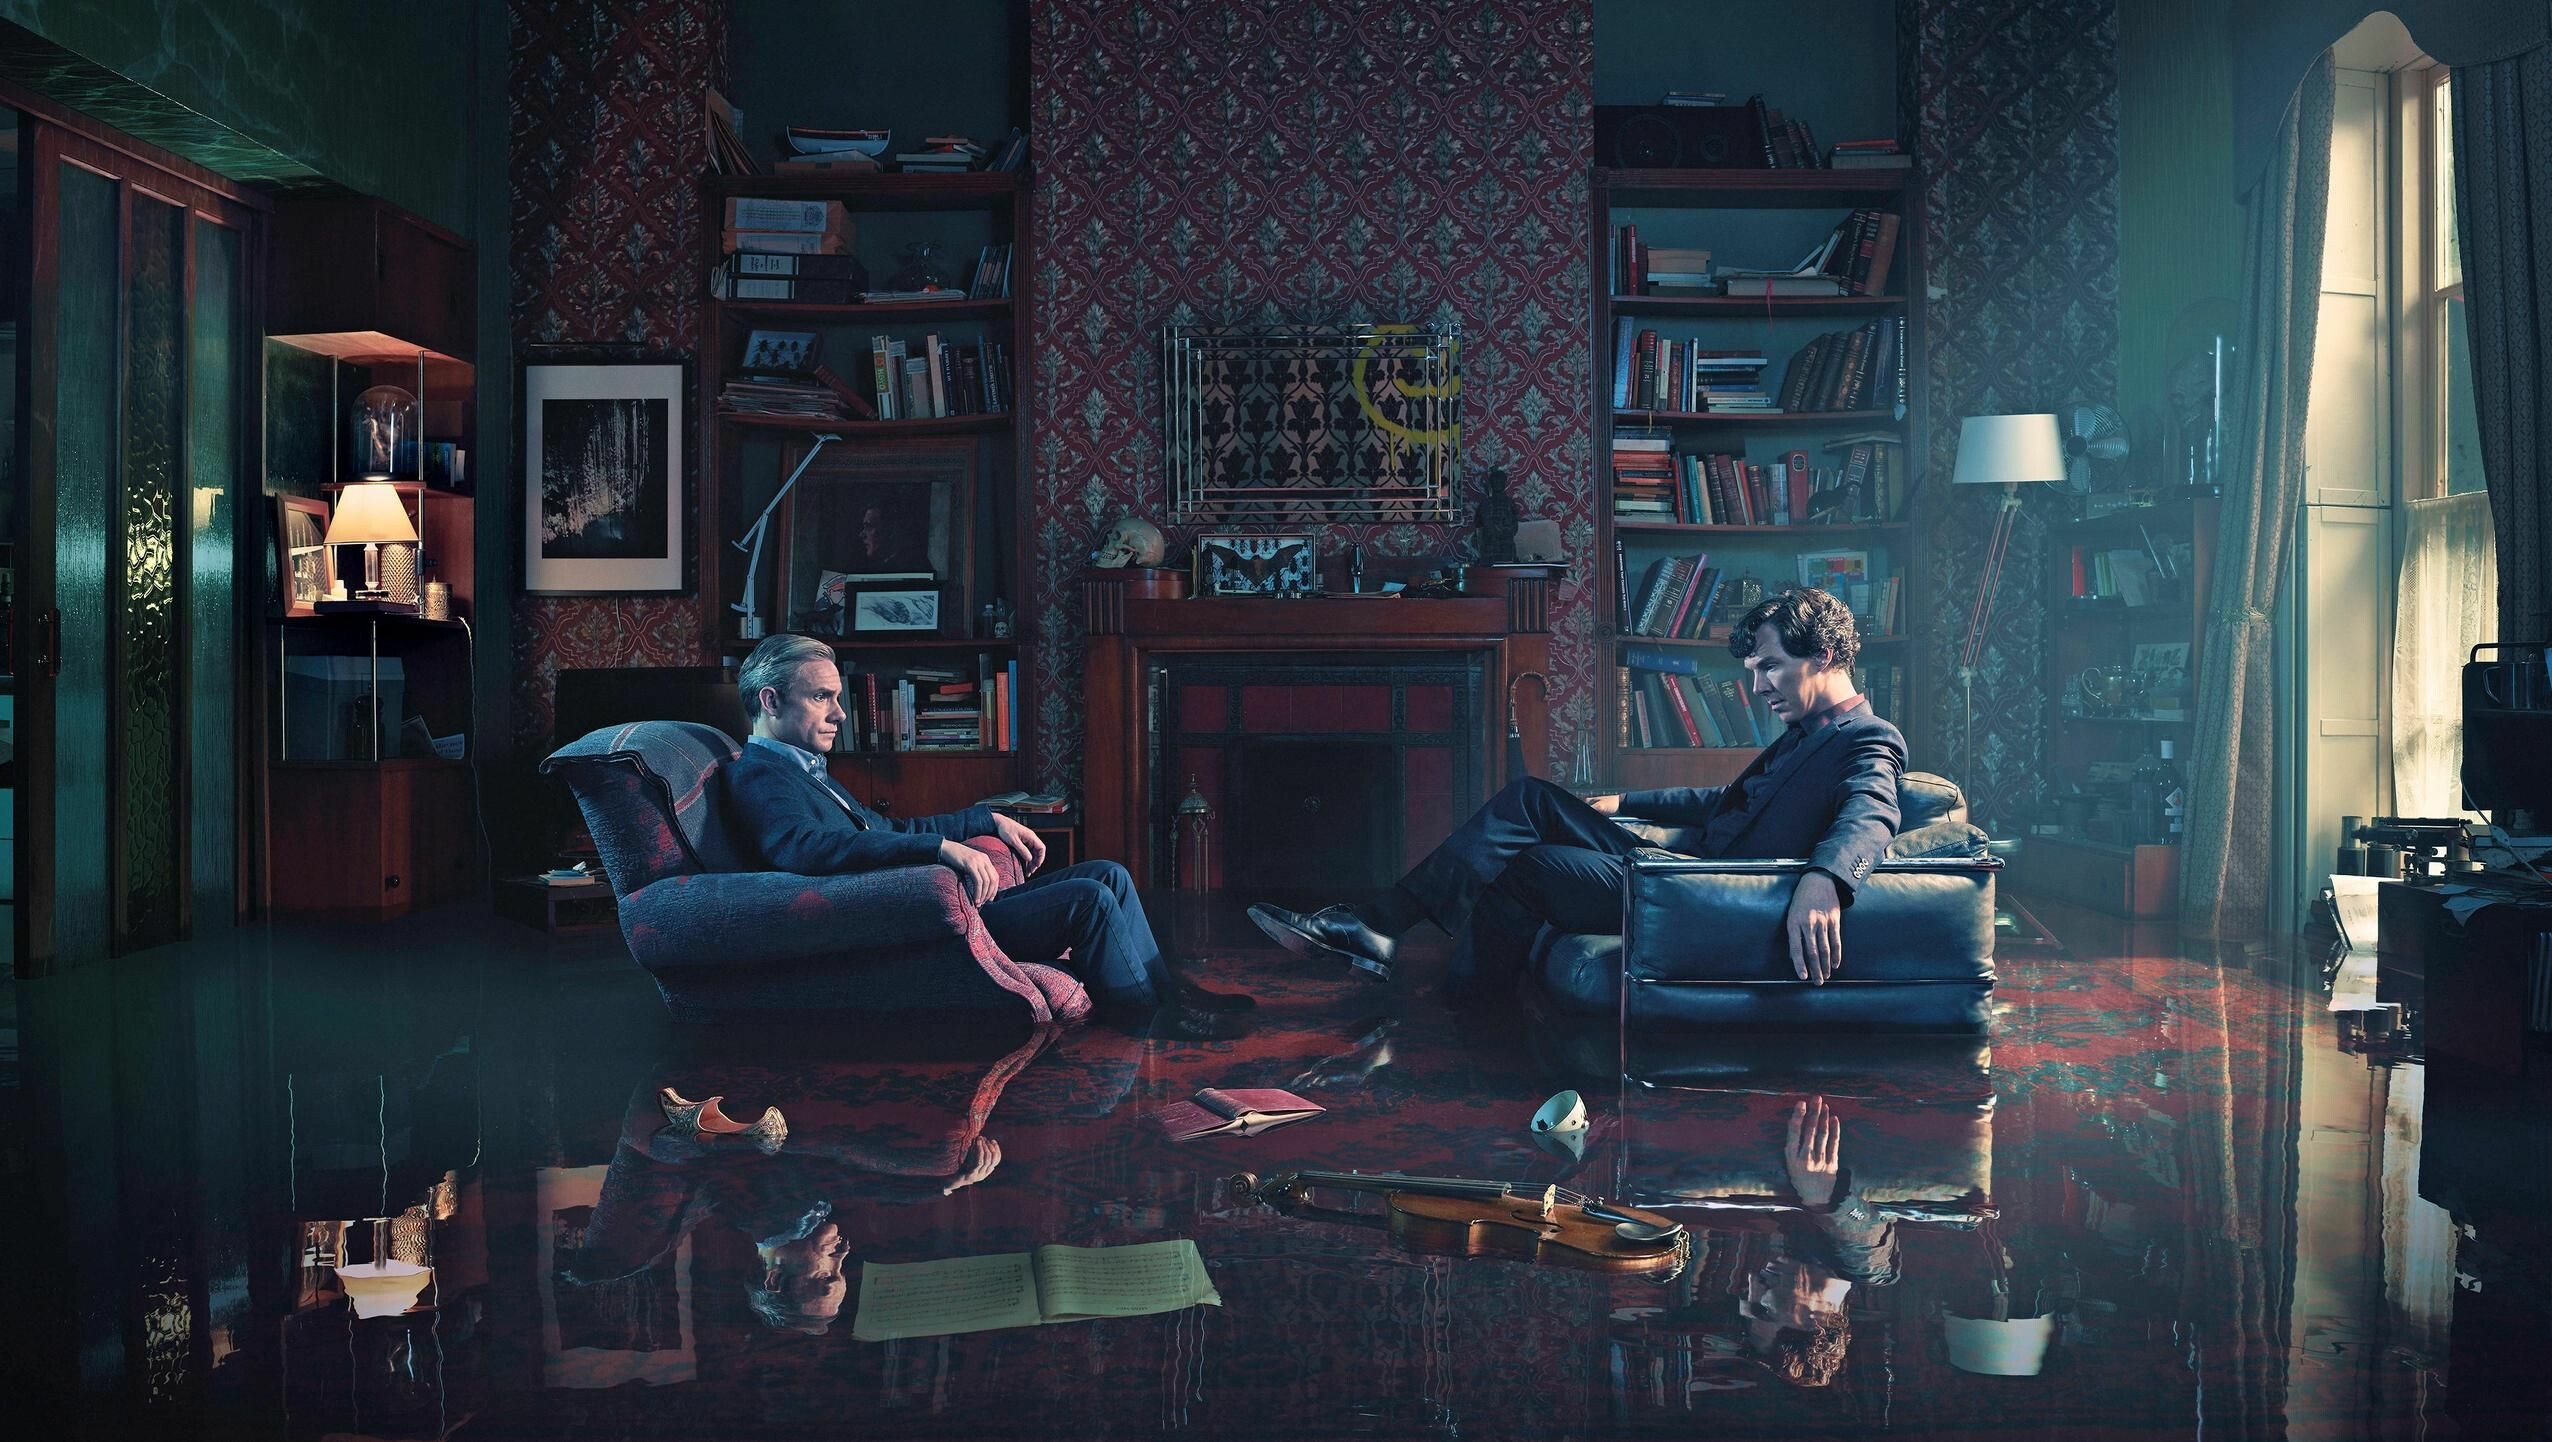 Sherlock (TV Series): The combination of Sherlock's intellect and Watson's pragmatism helps them forge an unbreakable alliance as they solve a series of baffling crimes together. 2560x1450 HD Background.